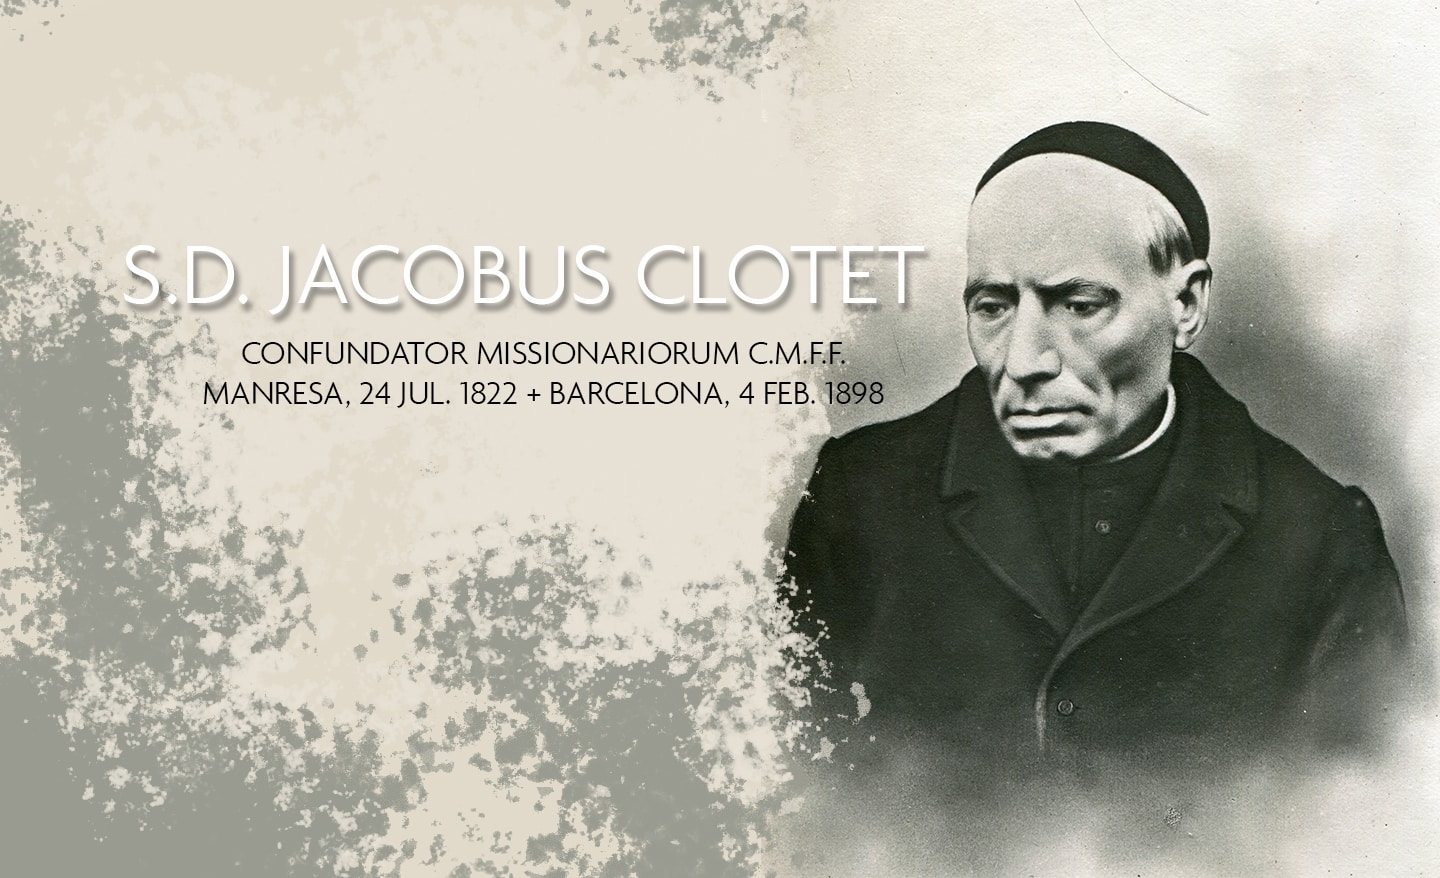 Remembering the First Centenary of the Servant of God, Jaime Clotet y Fabrés, Cofounder of the Claretian Missionaries